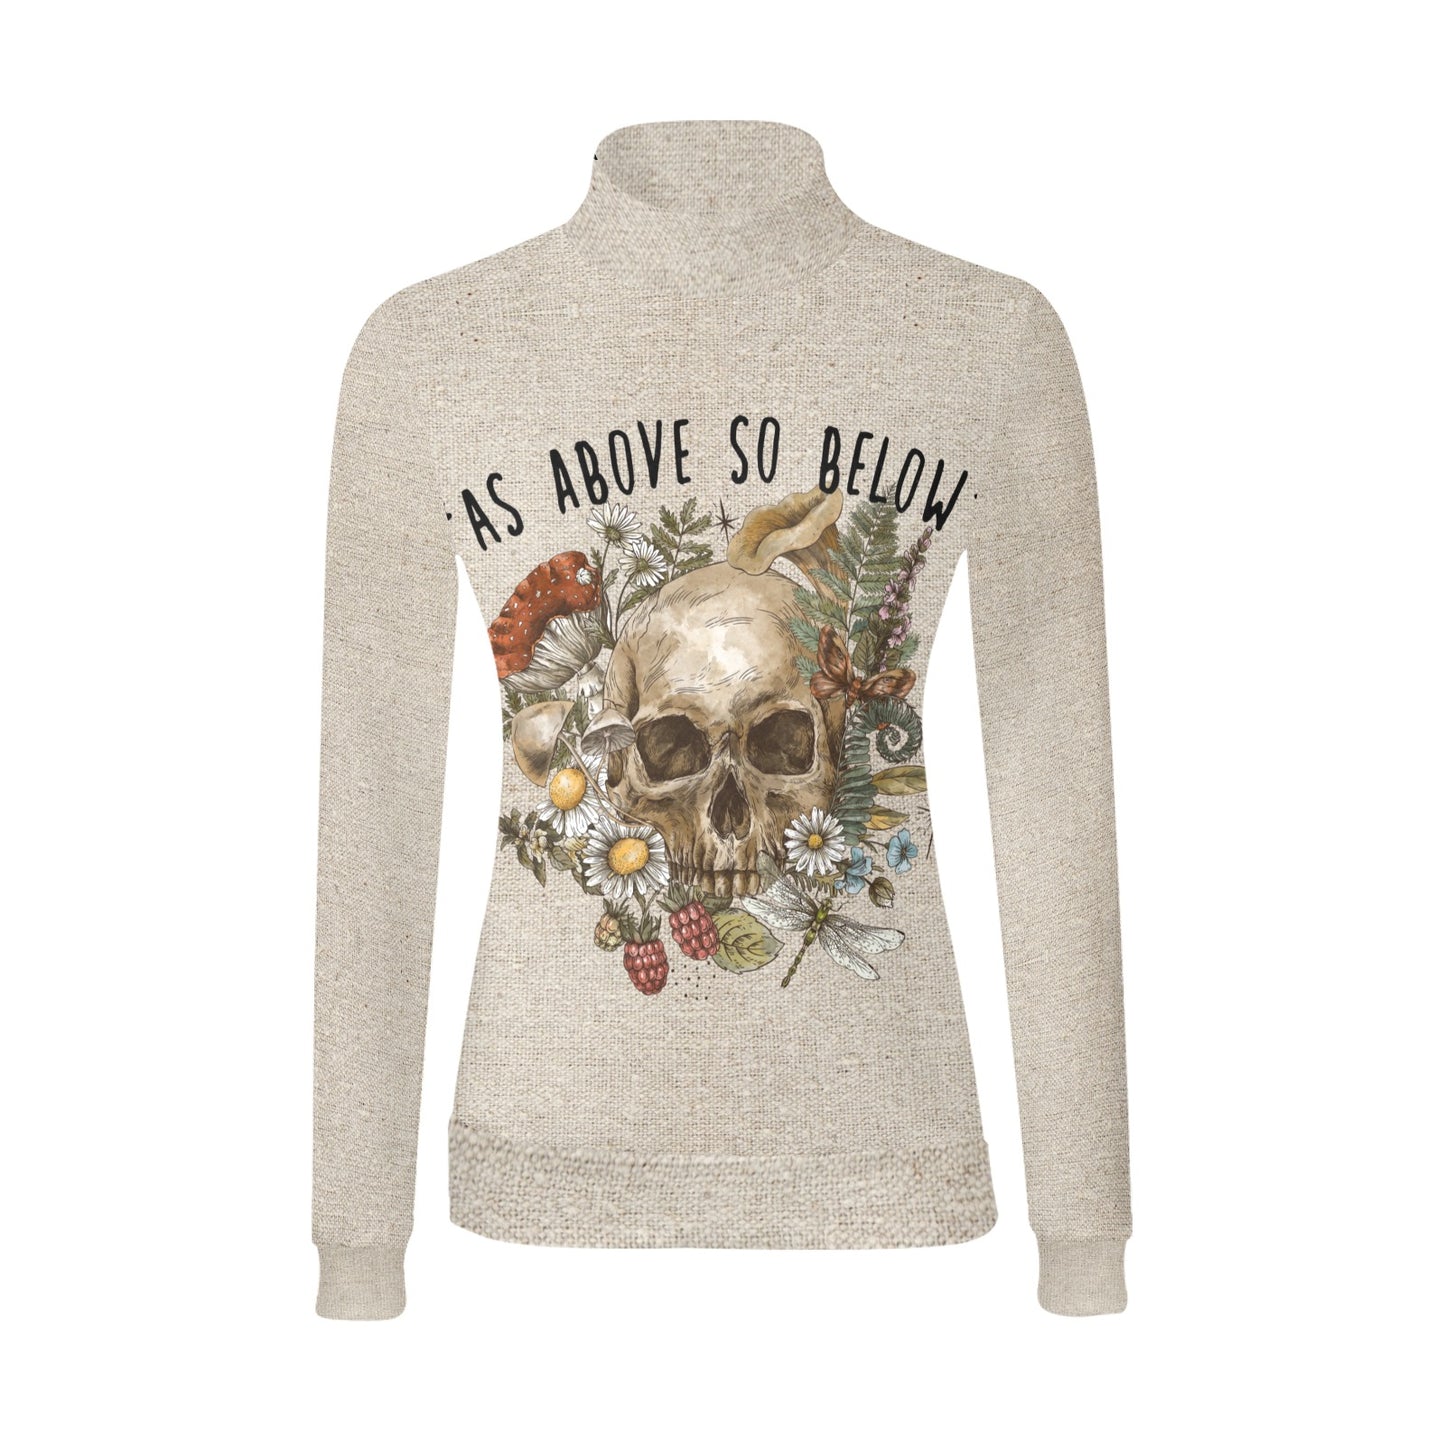 As Above So Below Witch Long Sleeves Shirt Women's All Over Print Mock Neck Sweater